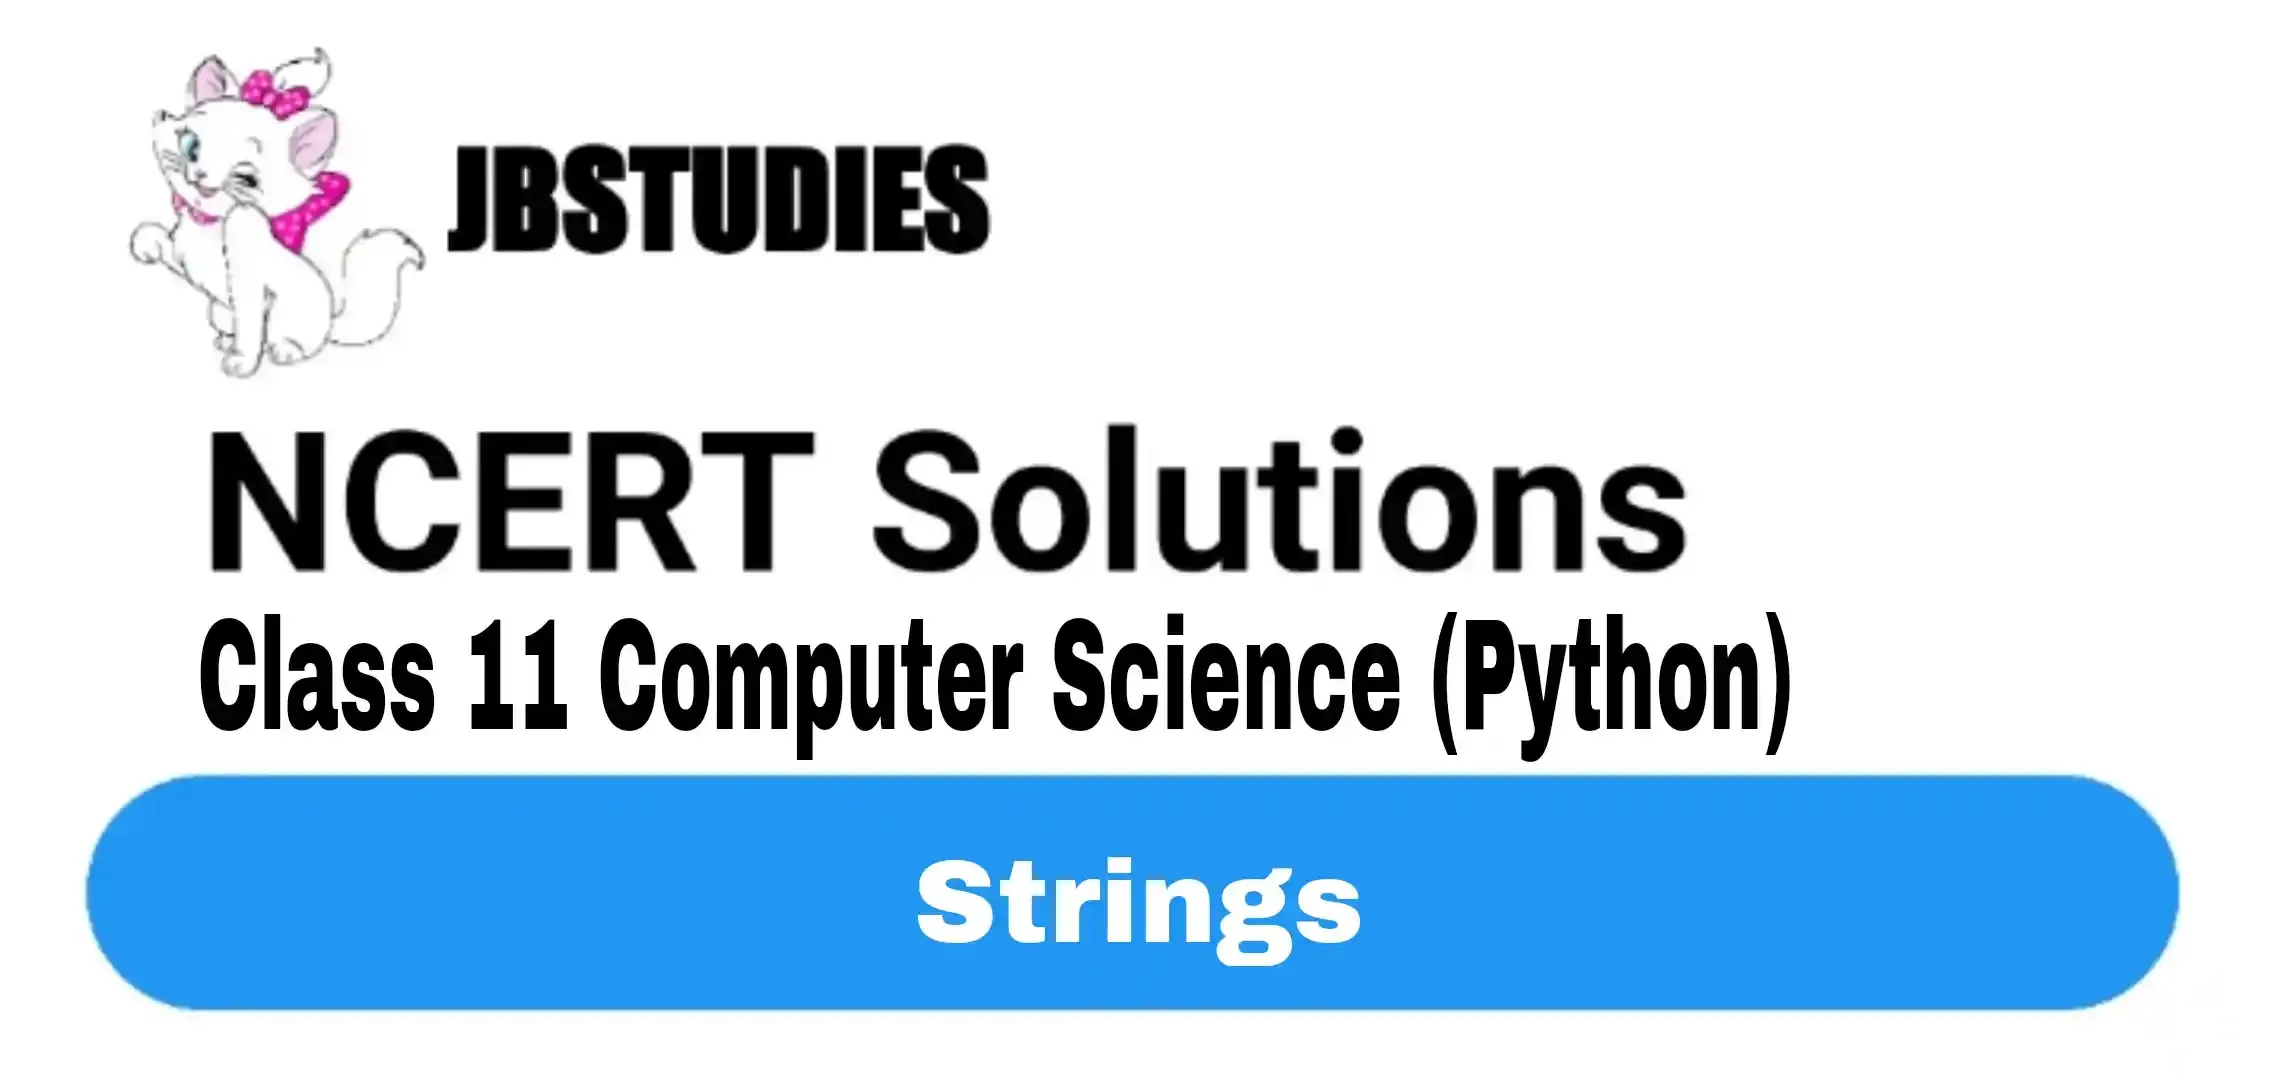 Solutions Class 11 Computer Science (Python) Chapter-12 (Strings)